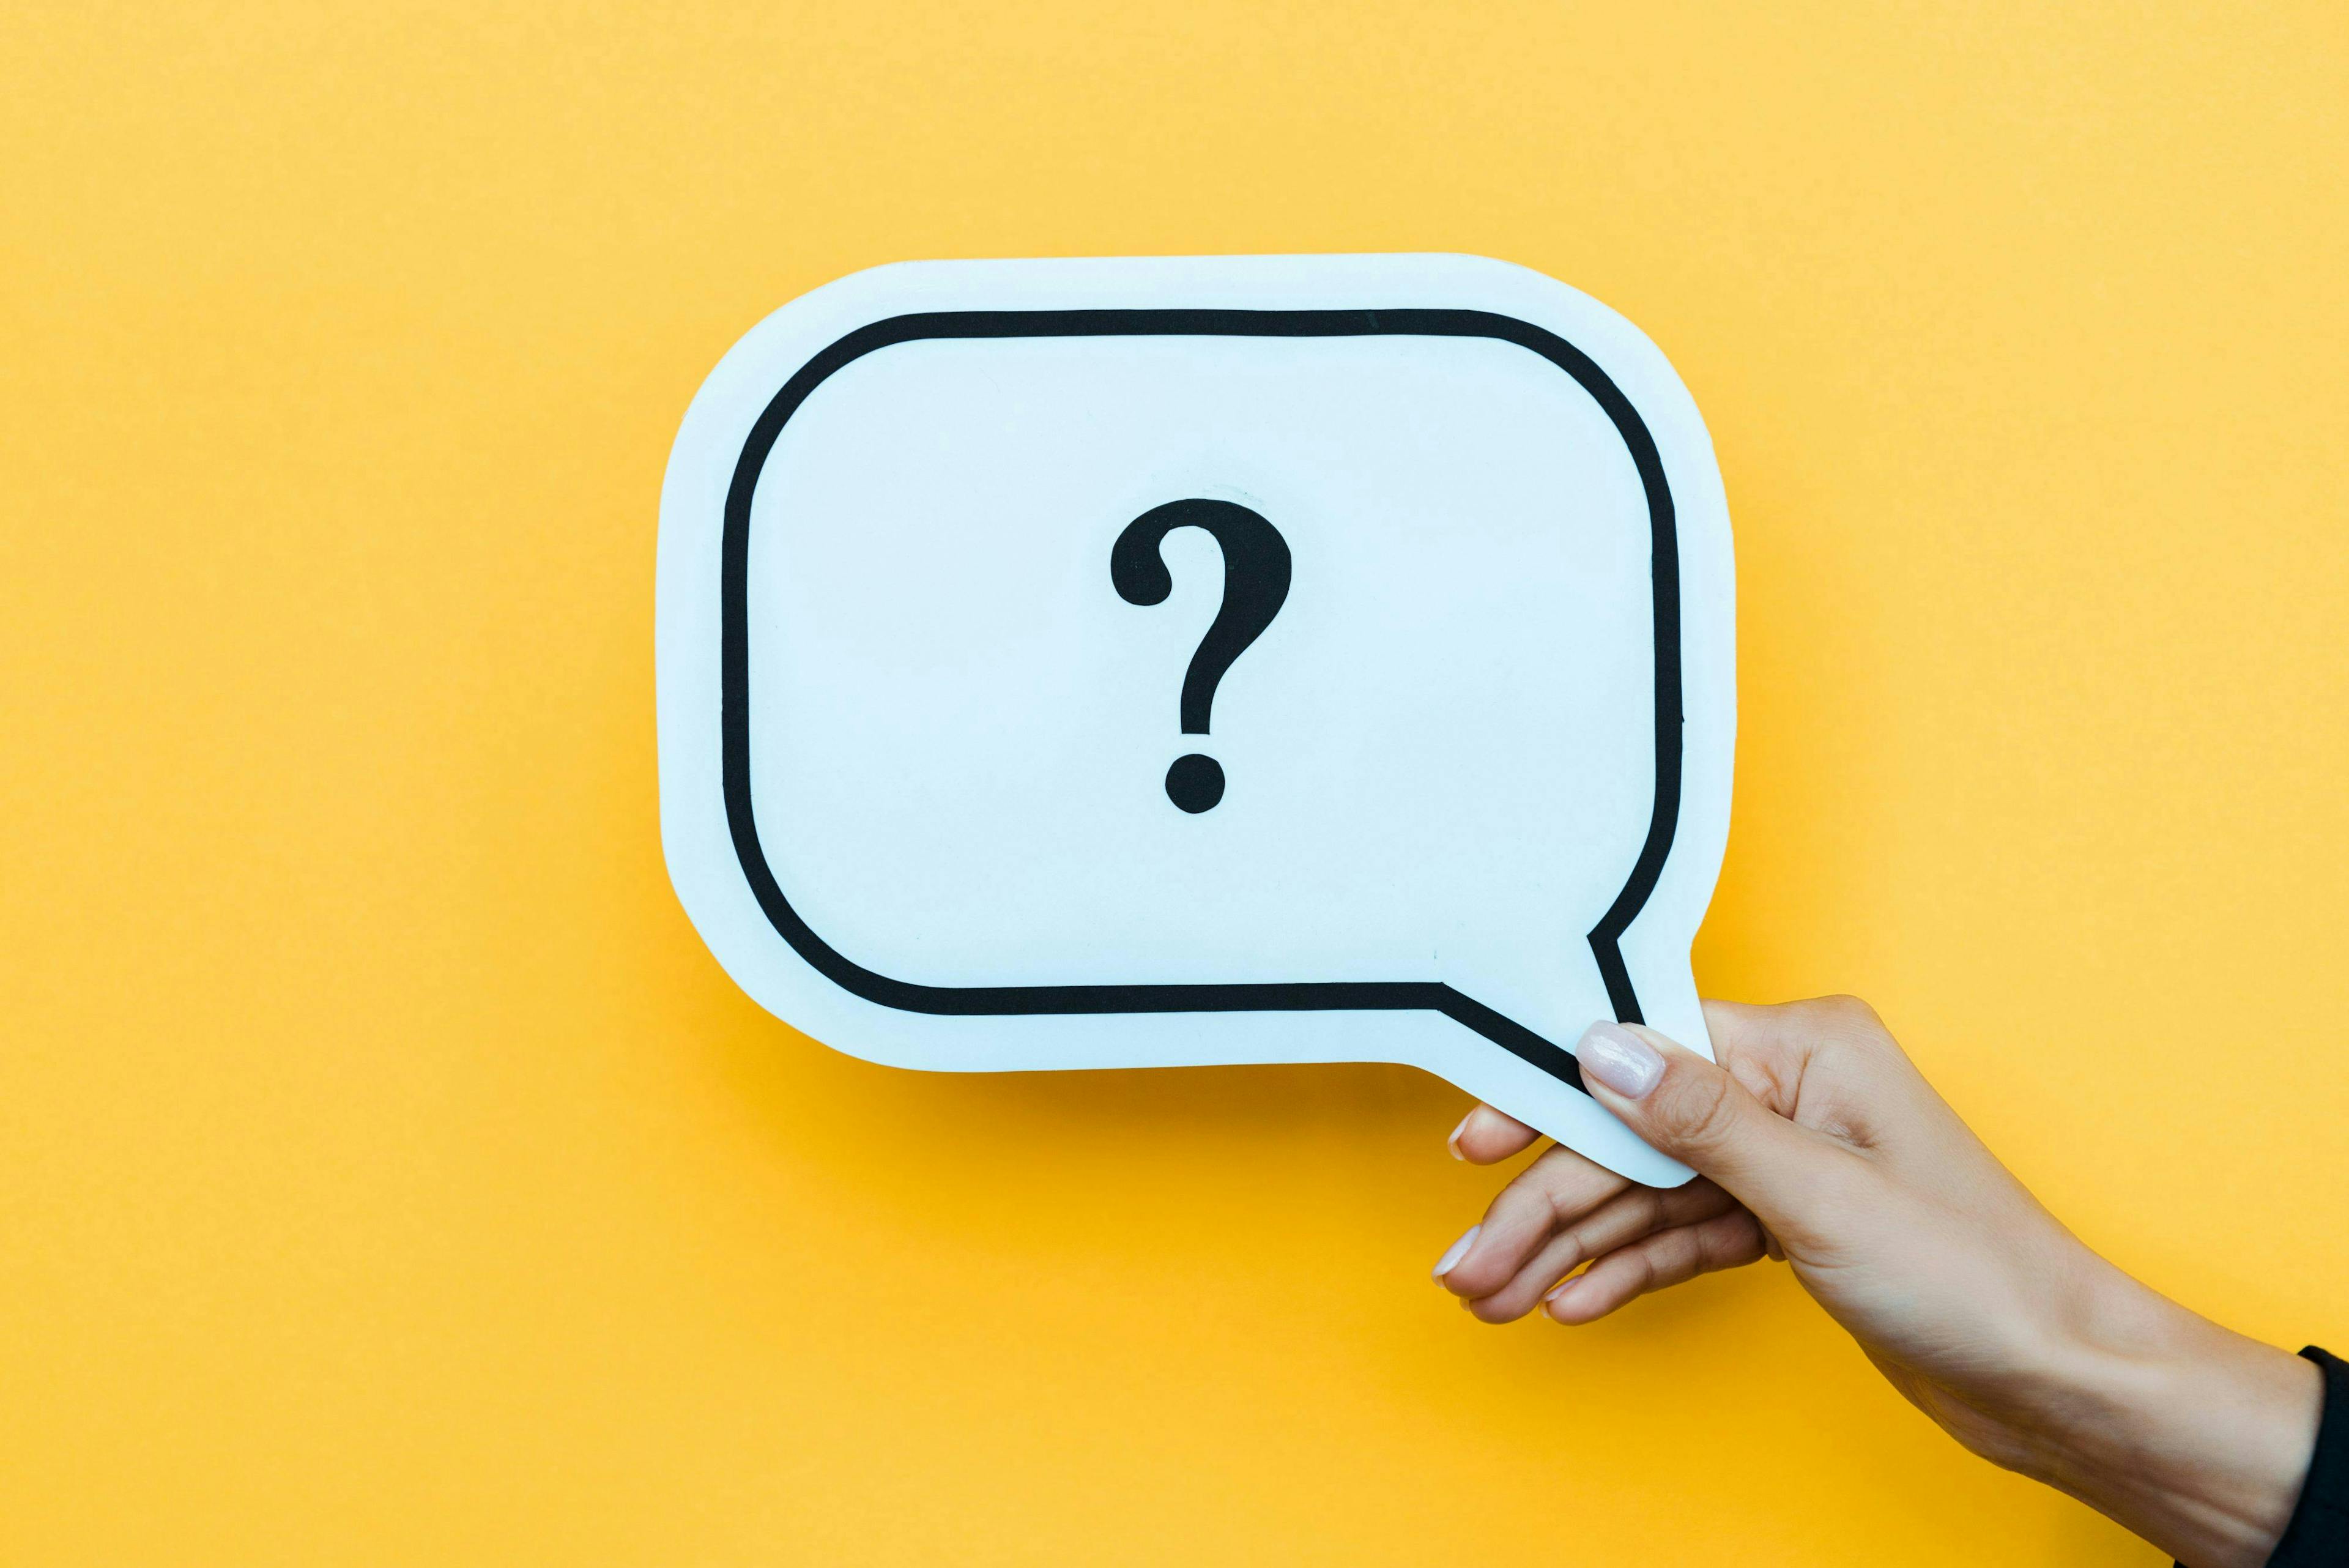 A hand holds a speech bubble cutout with a question mark, against a bright yellow background.